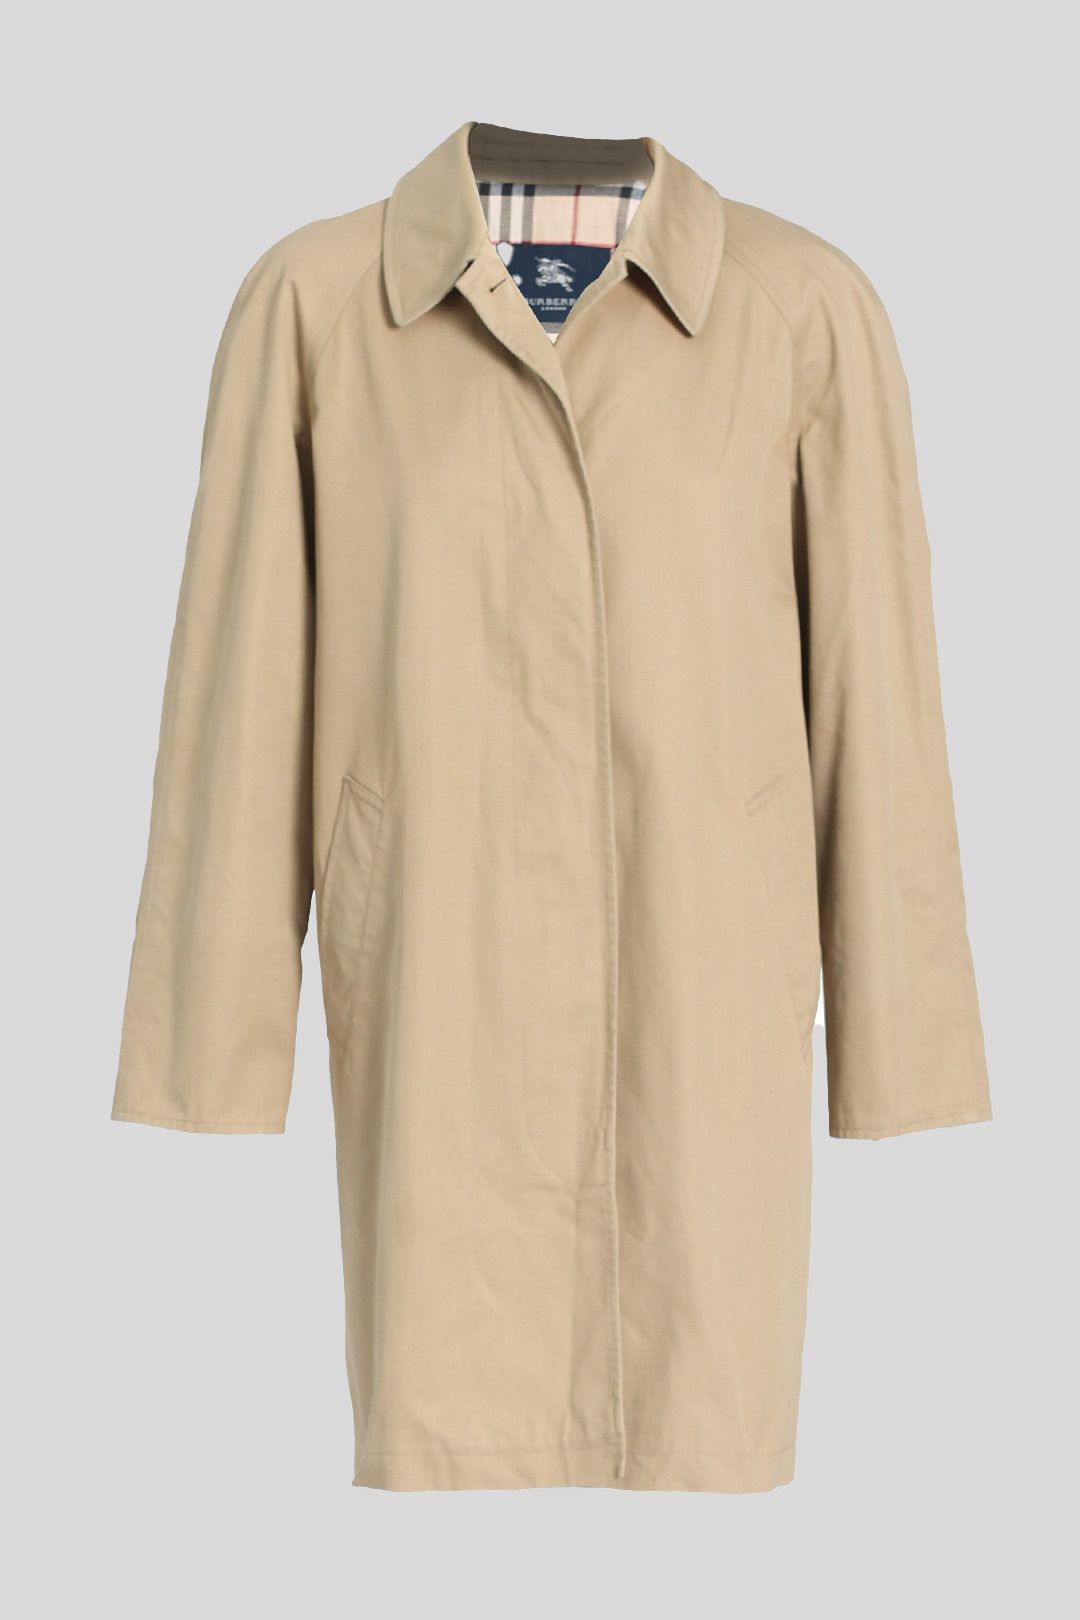 Burberry Beige Single Breasted Trench Coat